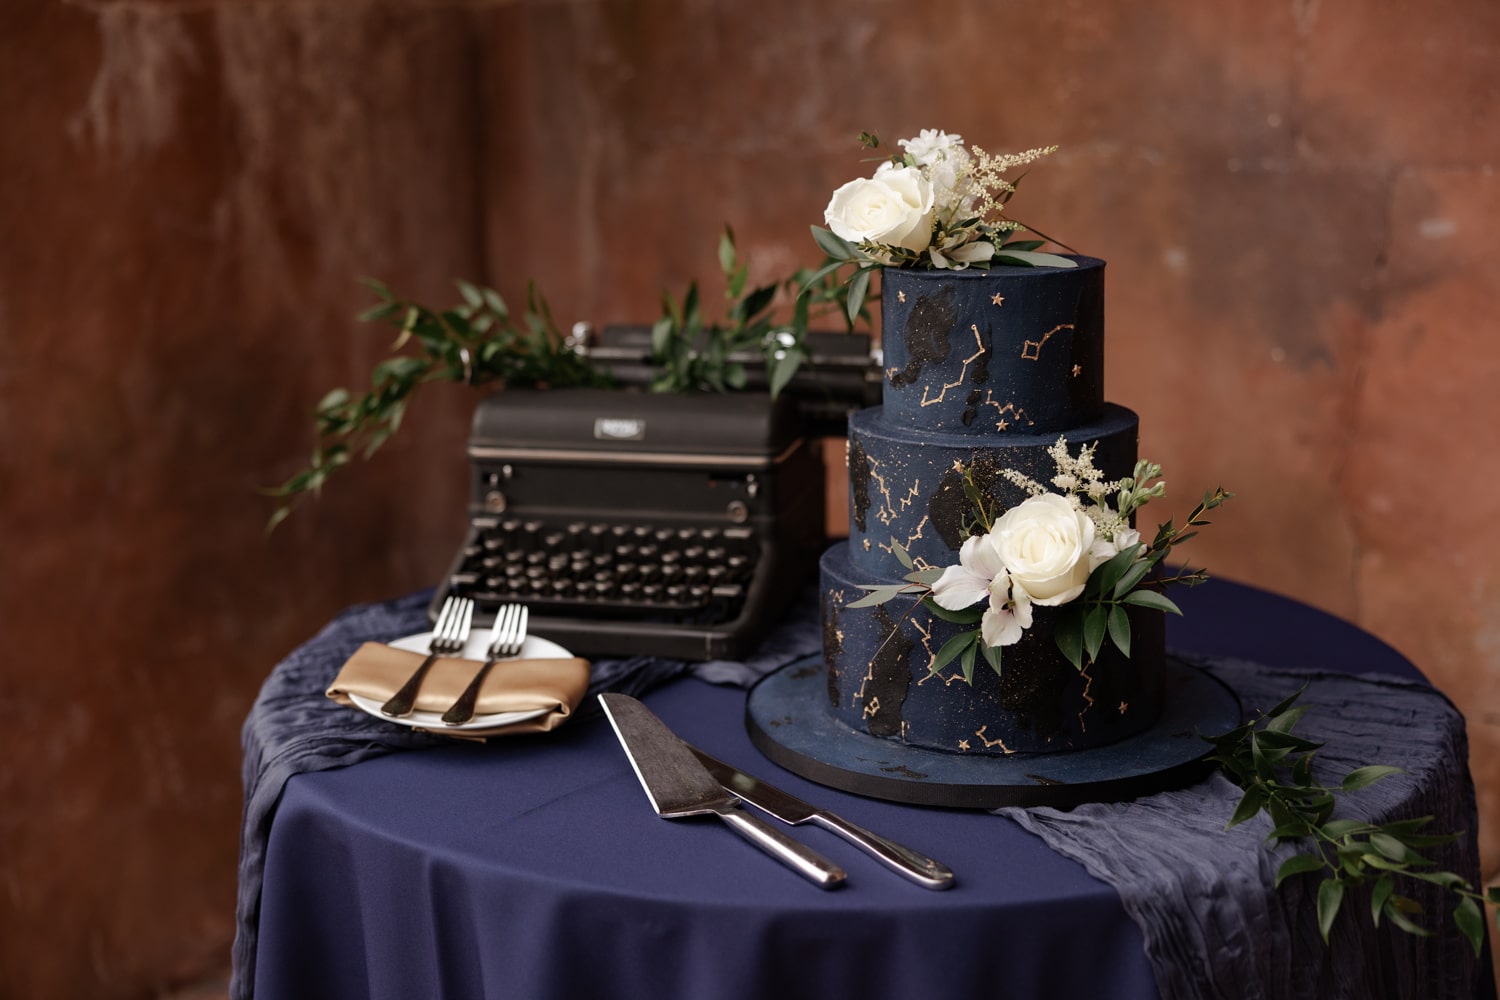 Custom designed deep blue wedding cake with constellation designs and white florals for celestial wedding at the Howey Mansion.